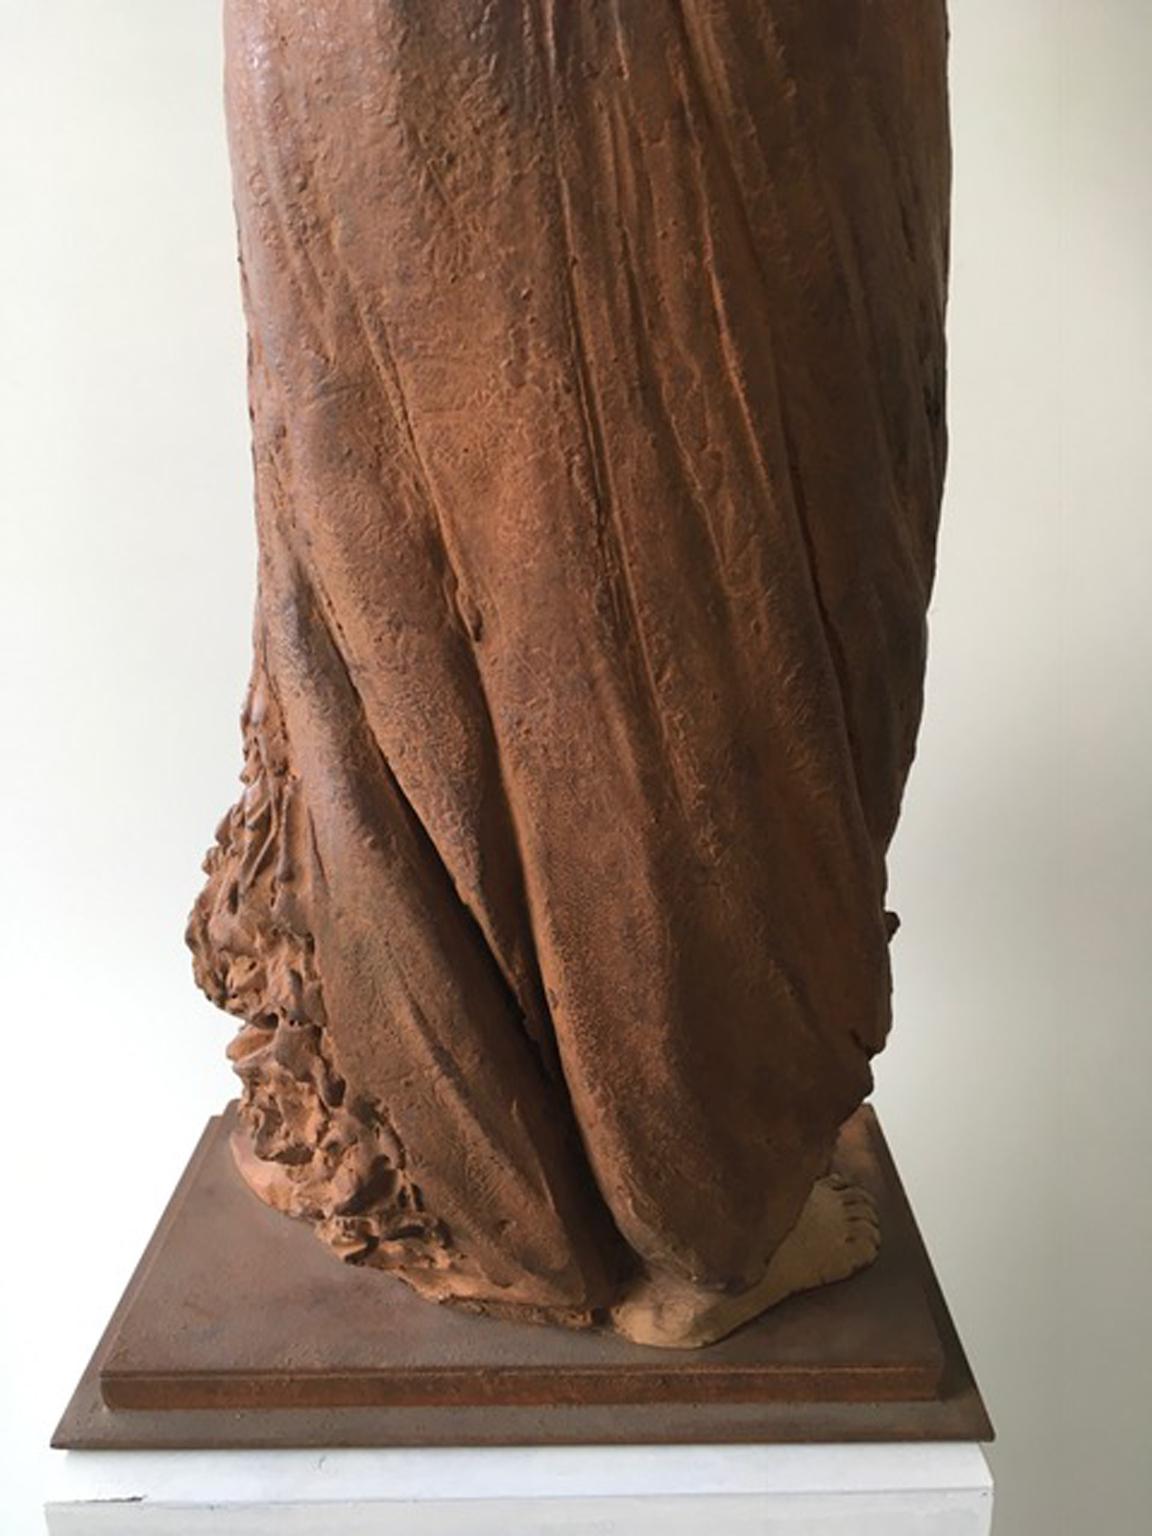 Dove Vai 2006 Italy Woman Bronze Sculpture Figurine by Ugo Riva For Sale 10